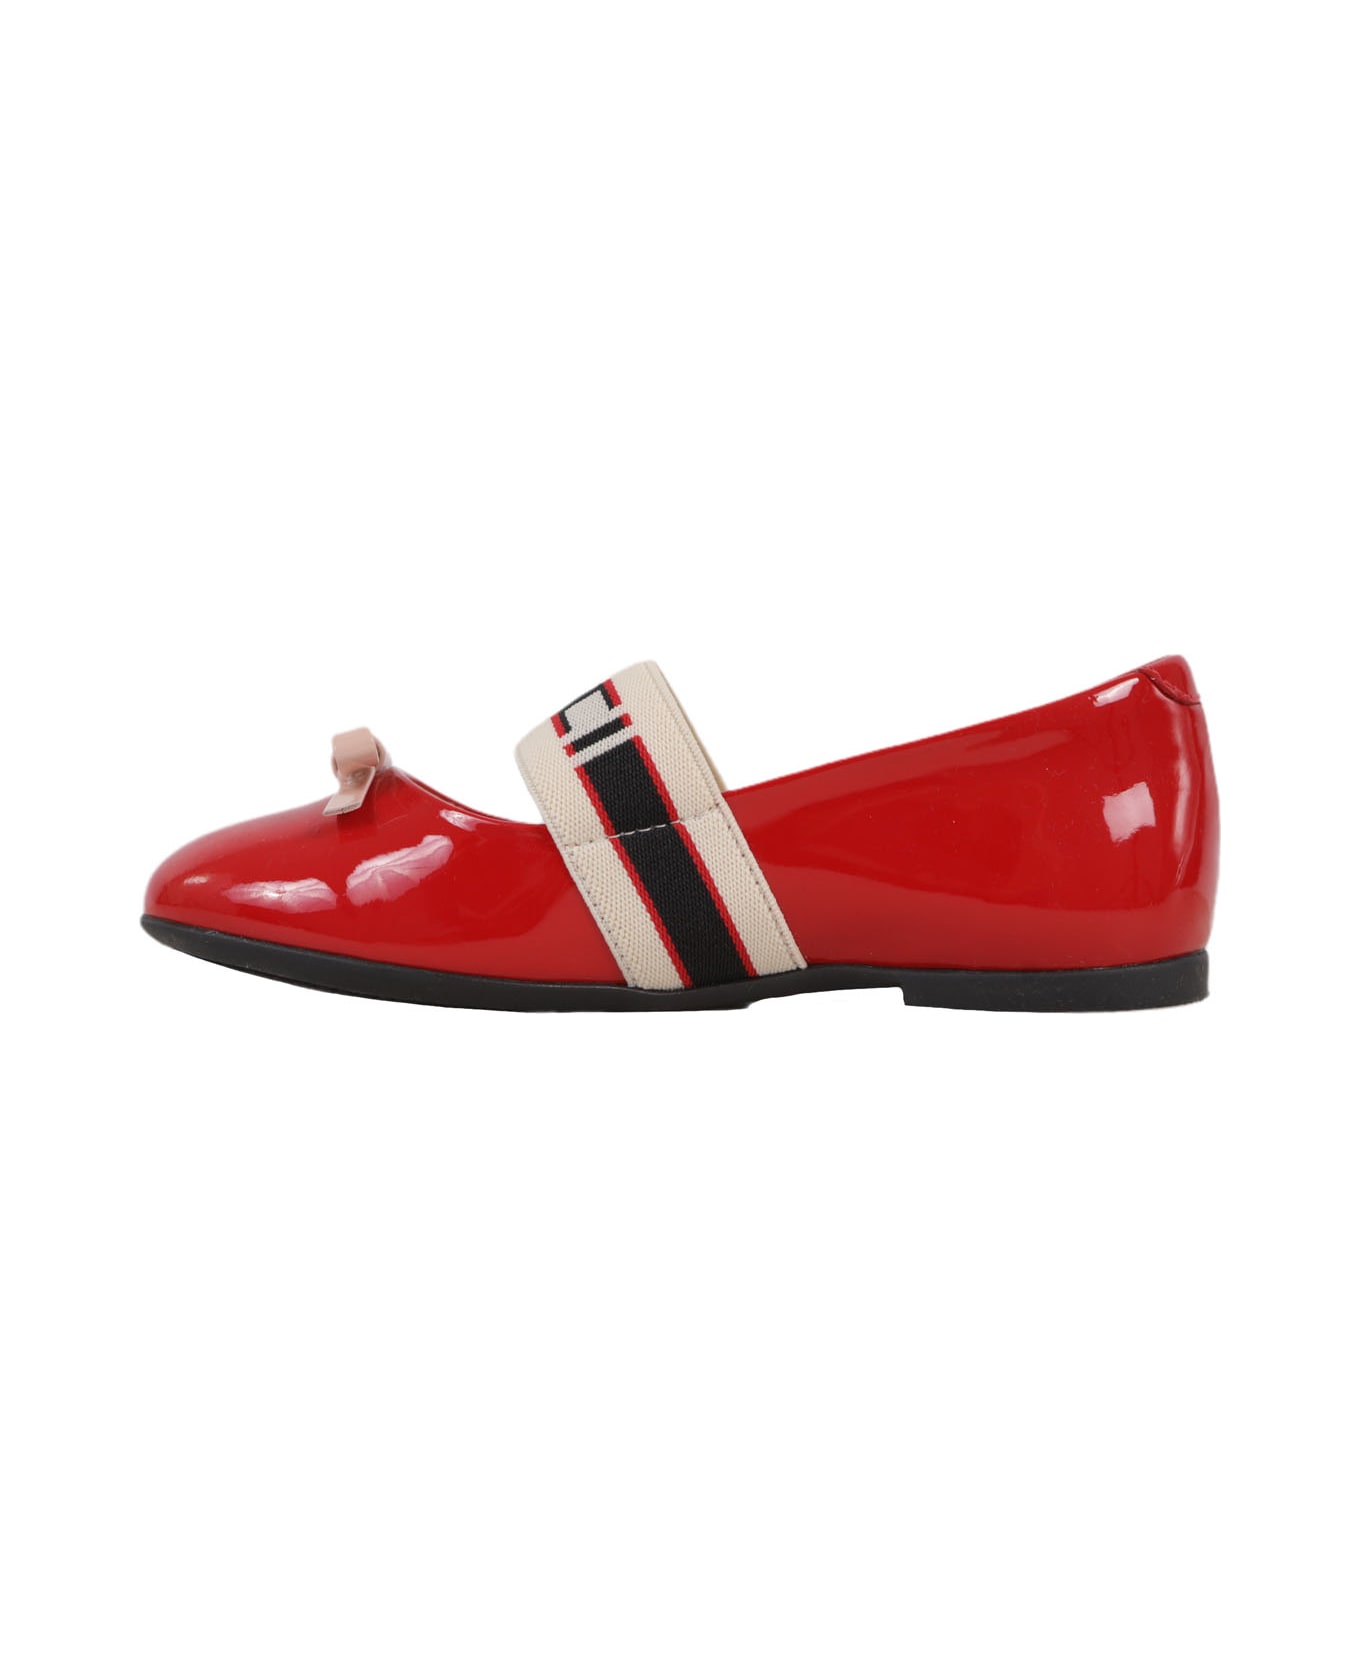 Gucci Patent Leather Ballet Flat - Red シューズ